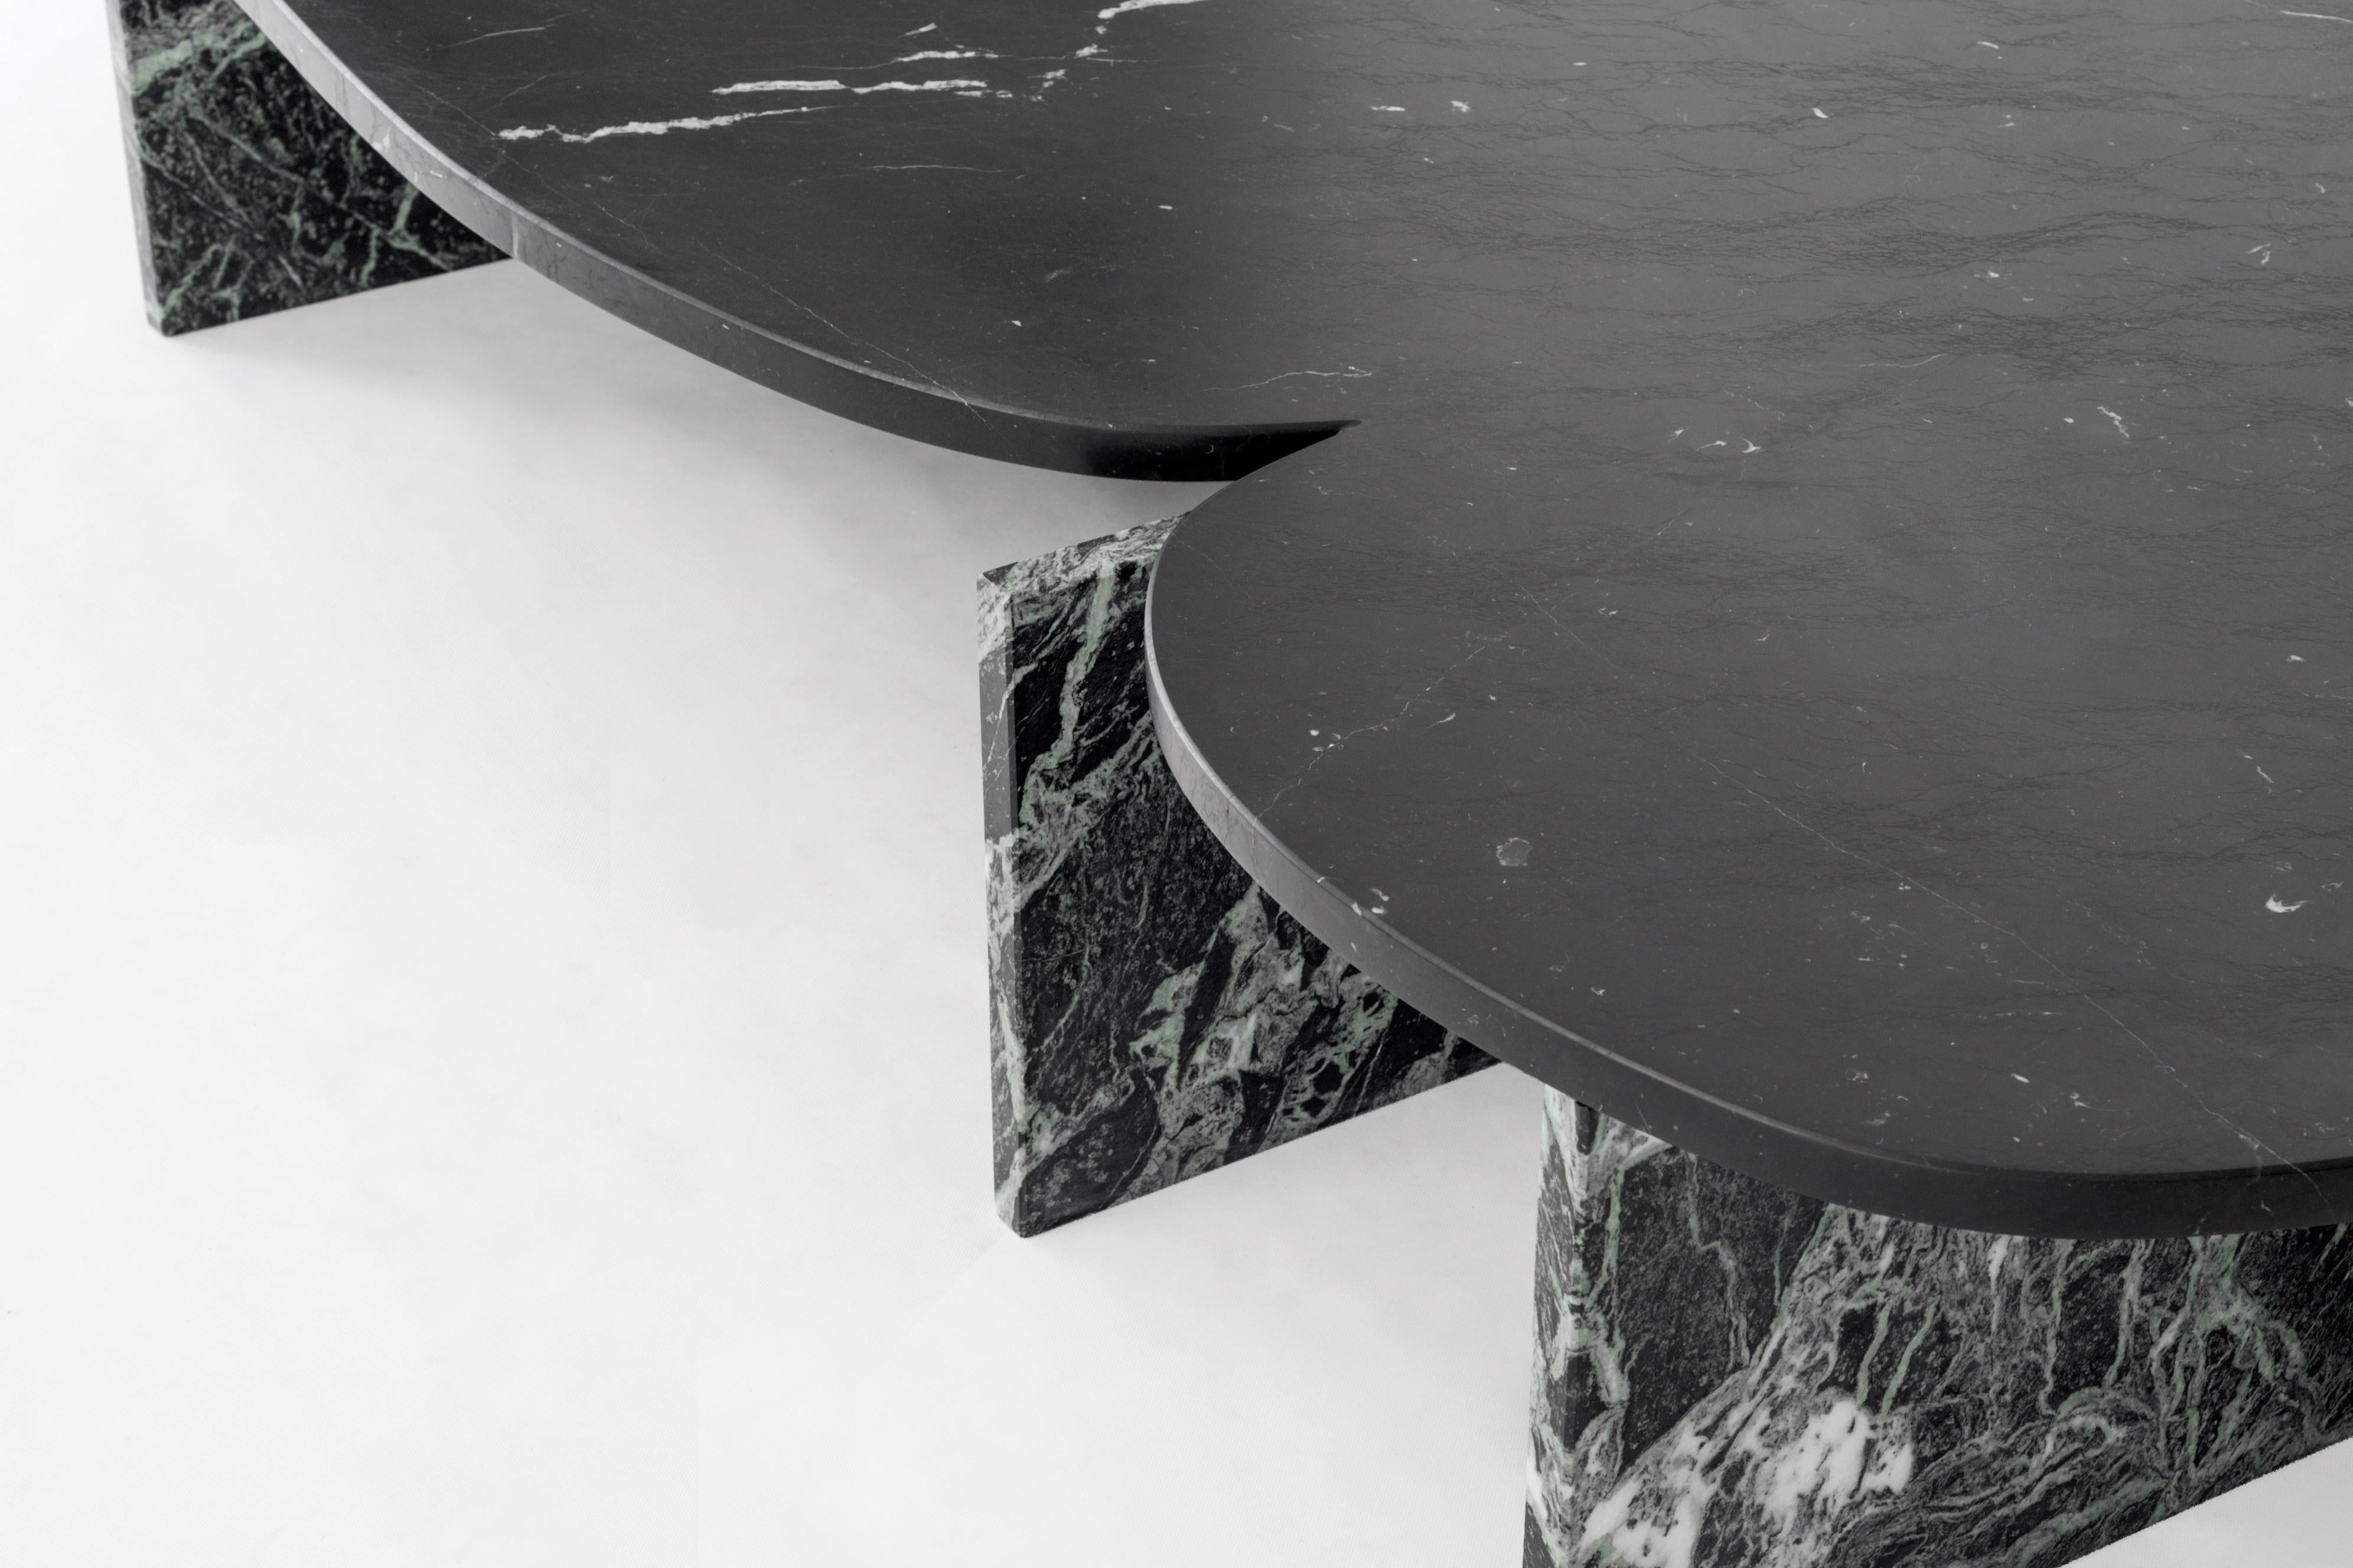 Trilithon Marble Coffee Table by OS And OOS
Dimensions: 200 x 110 x 37 cm
Materials: nero marquina and alpi verde marble
2018

Studio OS ∆ OOS is design studio for small objects to larger spatial concepts;
the studio tries to find the balance